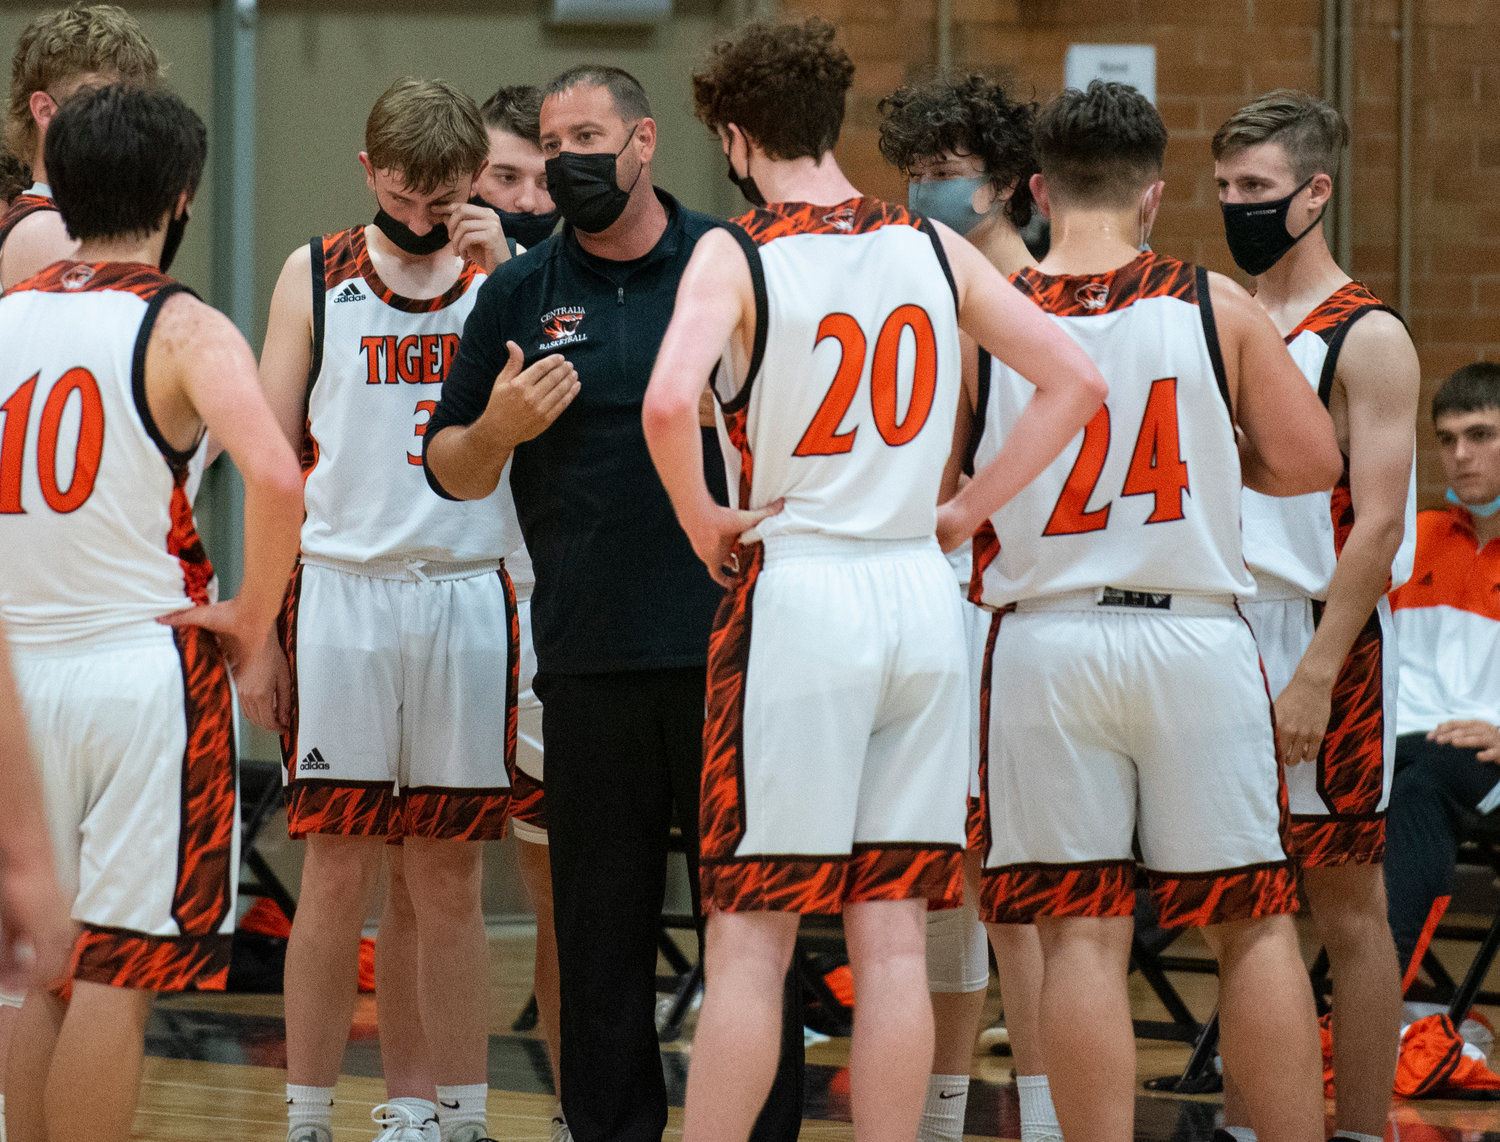 Centralia coach Kyle Donahue instructs his team during the a timeout in the third quarter on Monday.